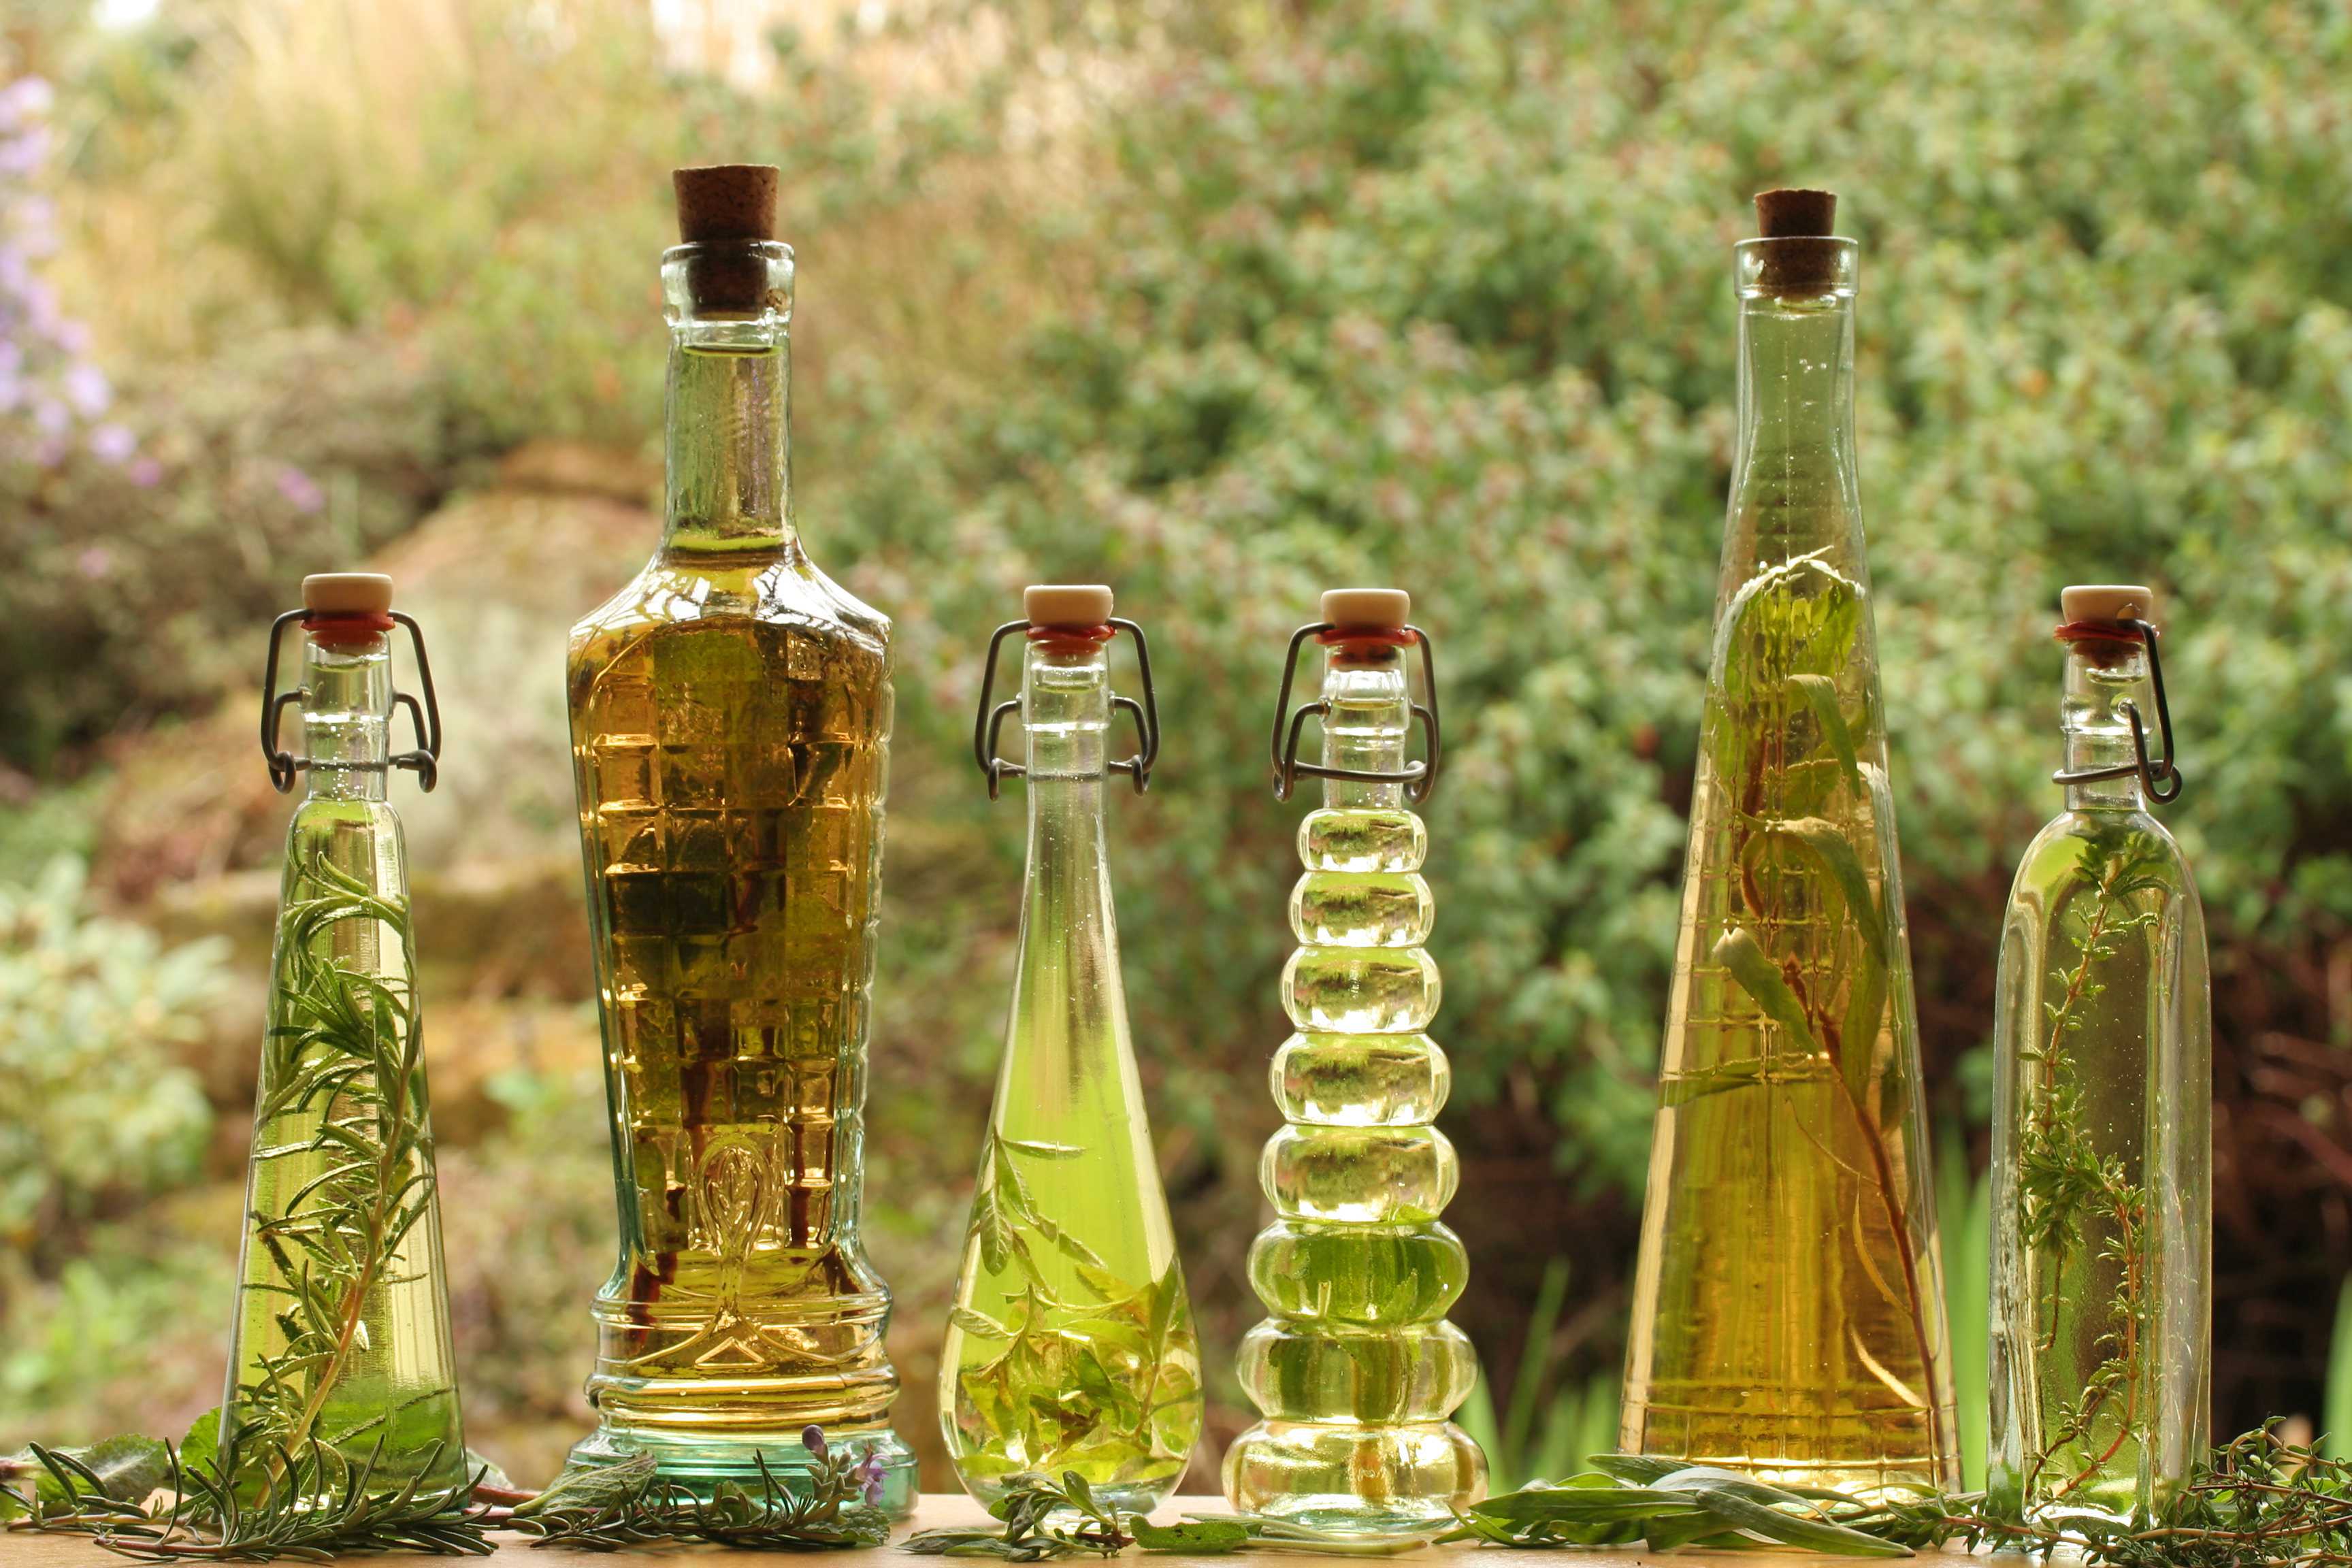 Close-up of decorative oil and vinegar bottles against a verdant outdoor background